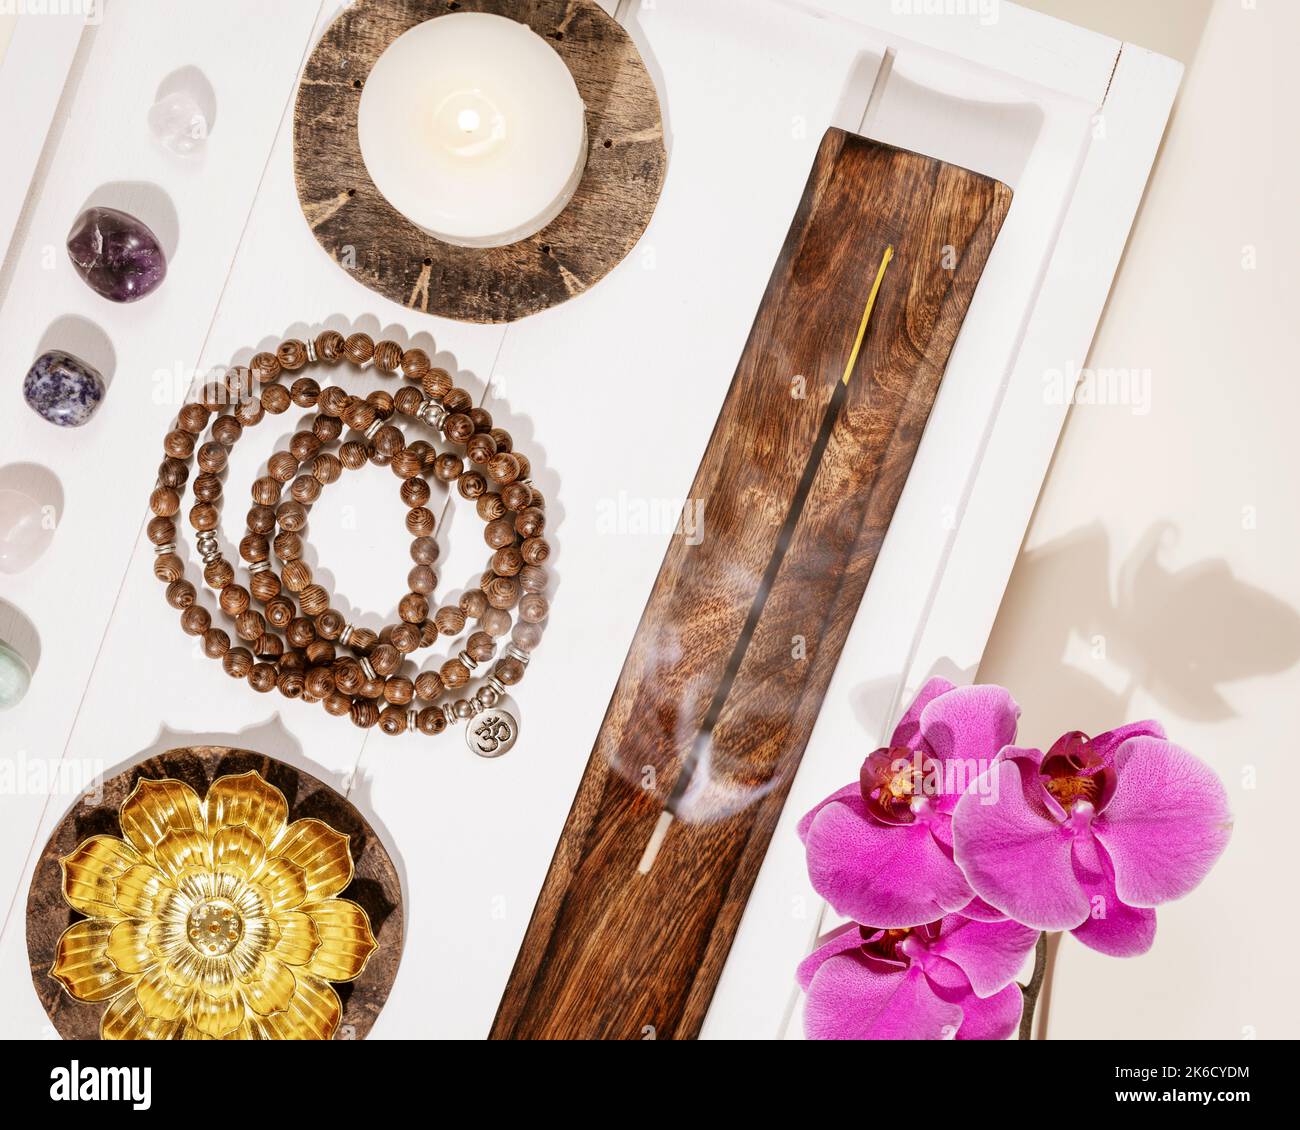 Rosary beads, candles, aroma sticks, chakra stones and orchid flowers Stock Photo